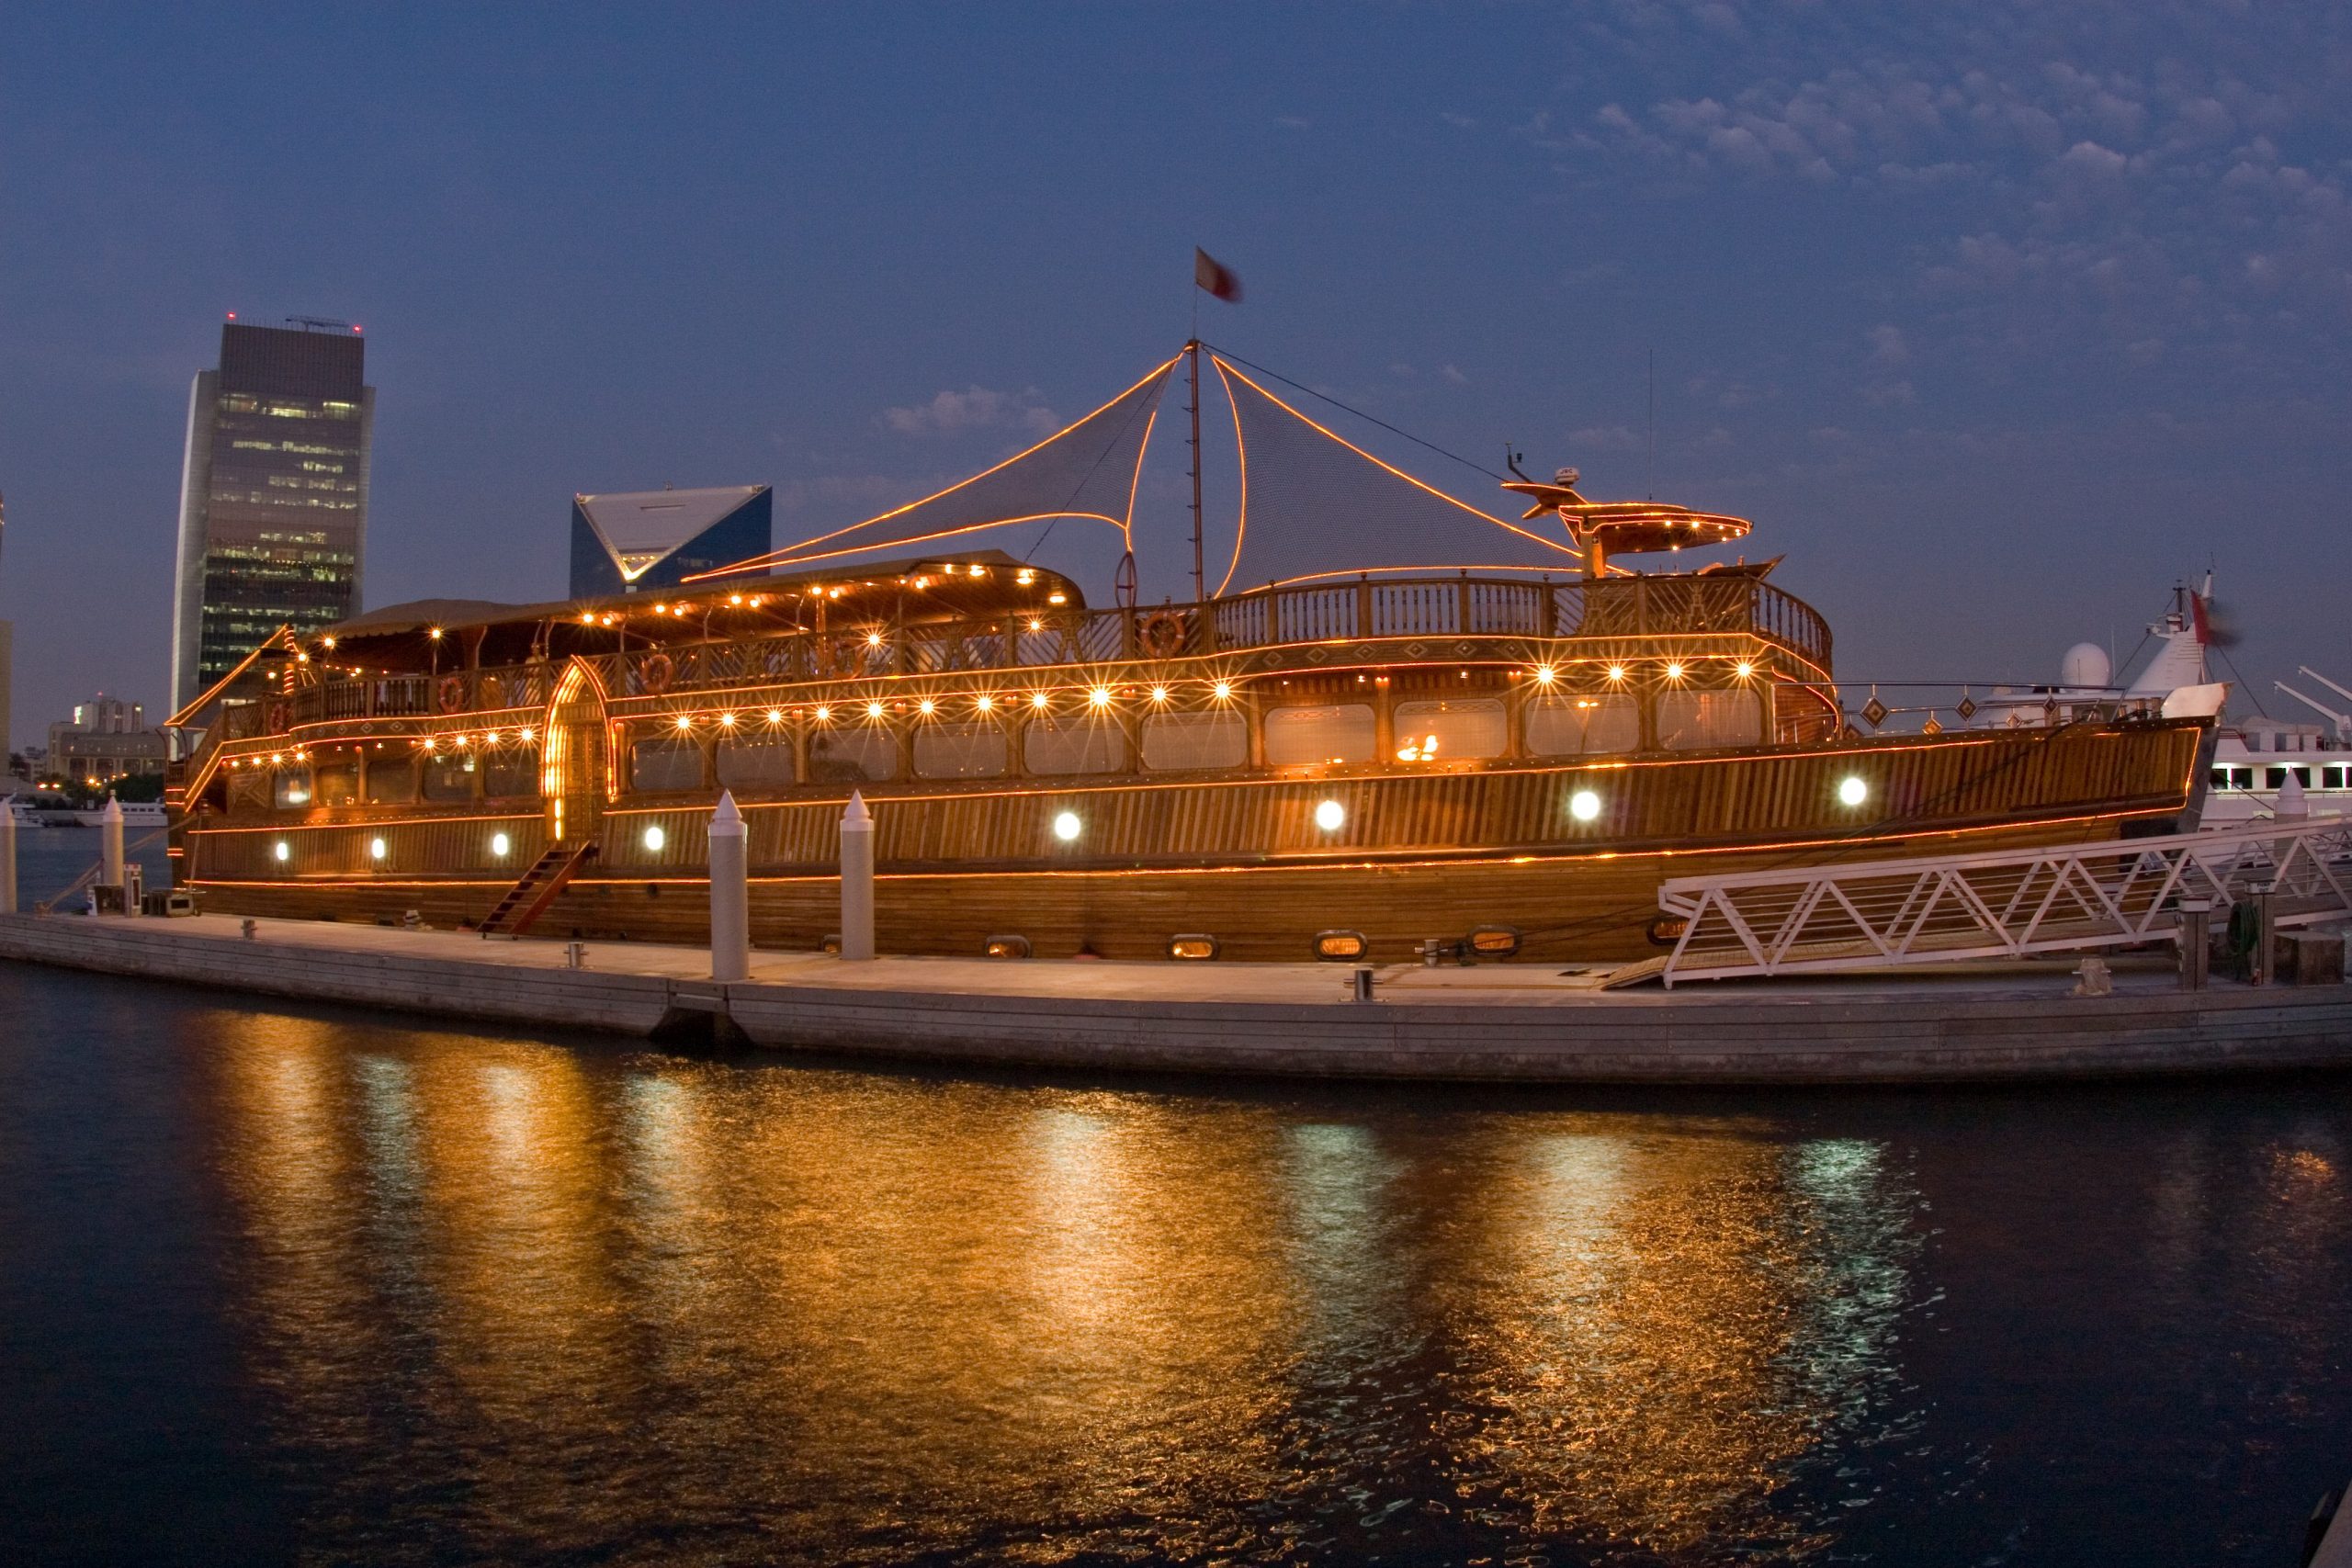 Dhow Cruise Tour Packages - Dubai Cruise Tour Packages